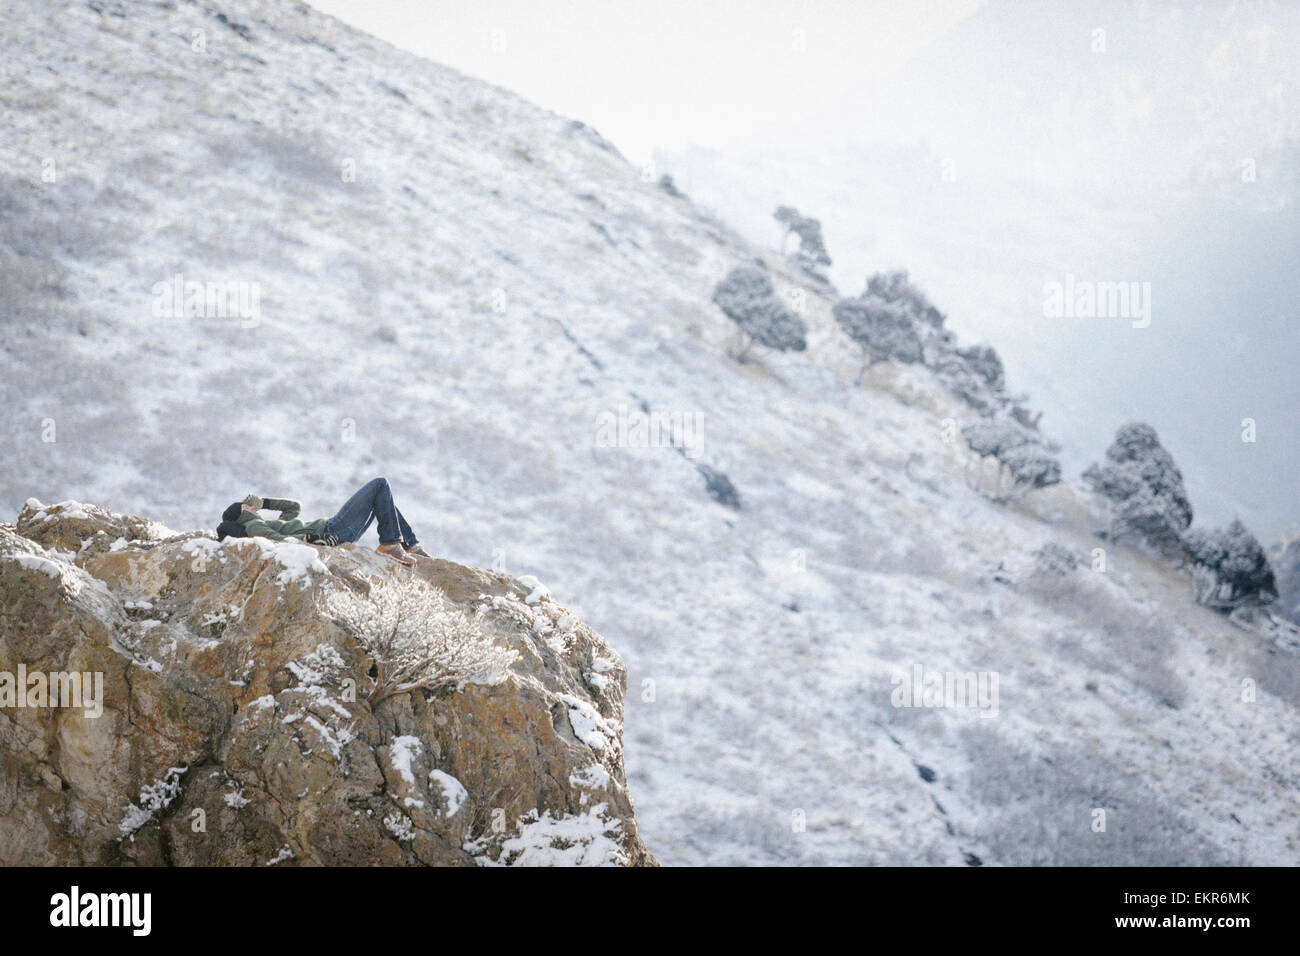 A man, a hiker in the mountains, taking a rest lying on a rock outcrop above a valley. Stock Photo